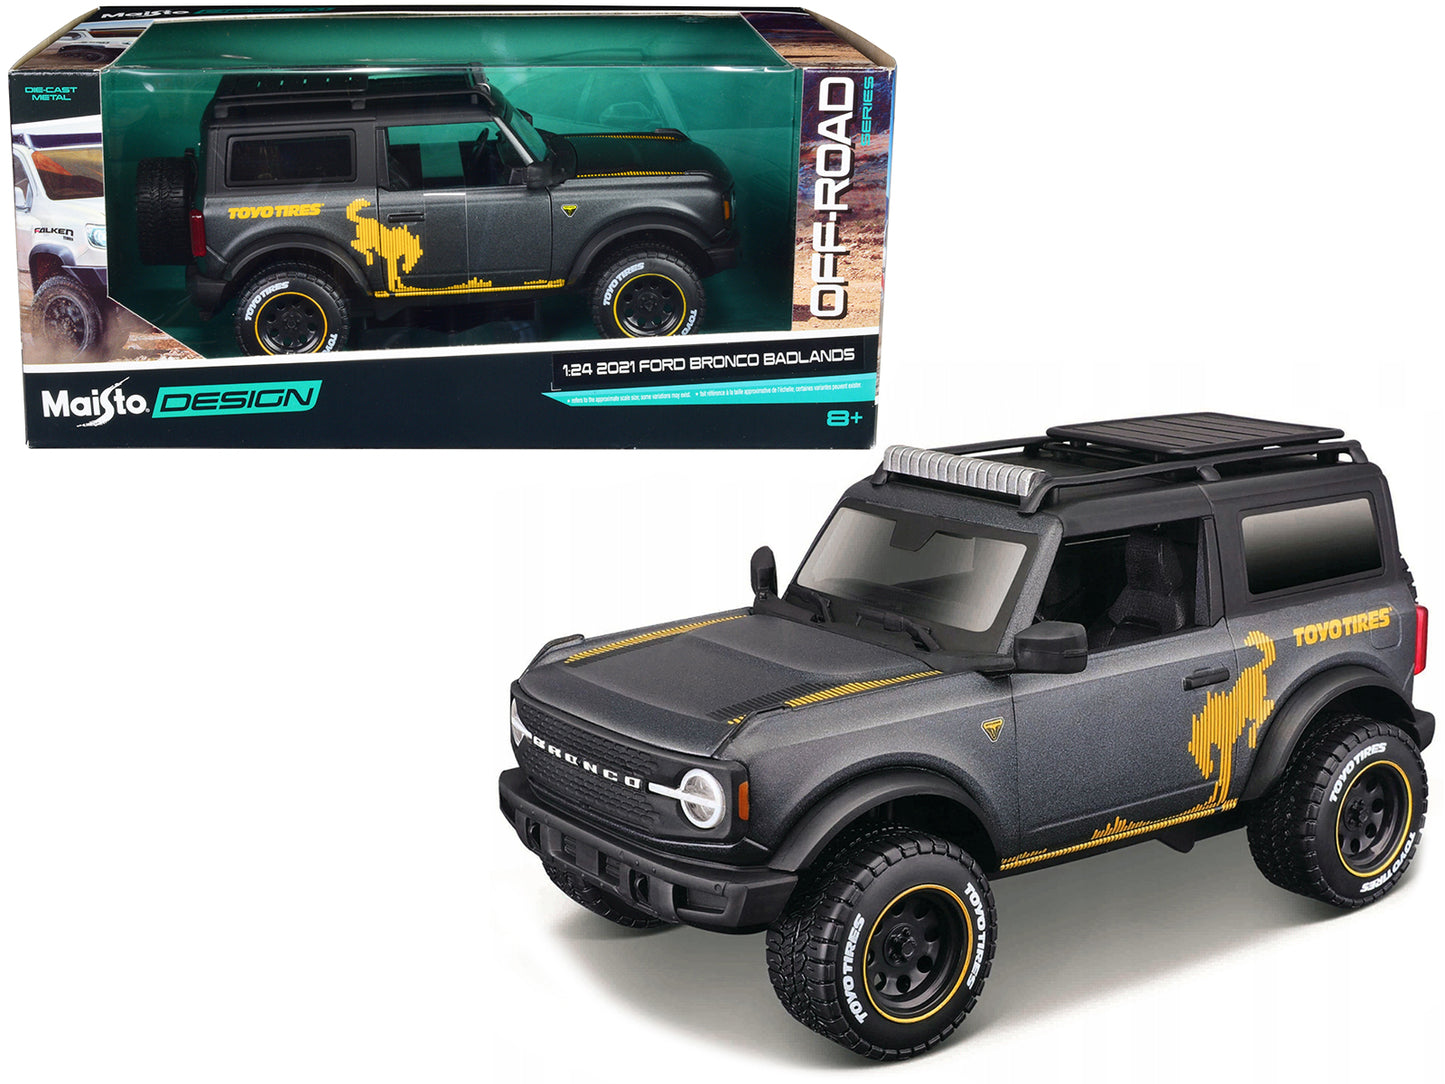 2021 Ford Bronco Badlands Dark Gray Metallic with Gold Graphics and Roof Rack "Off-Road" "Maisto Design" Series 1/24 Diecast Model Car by Maisto